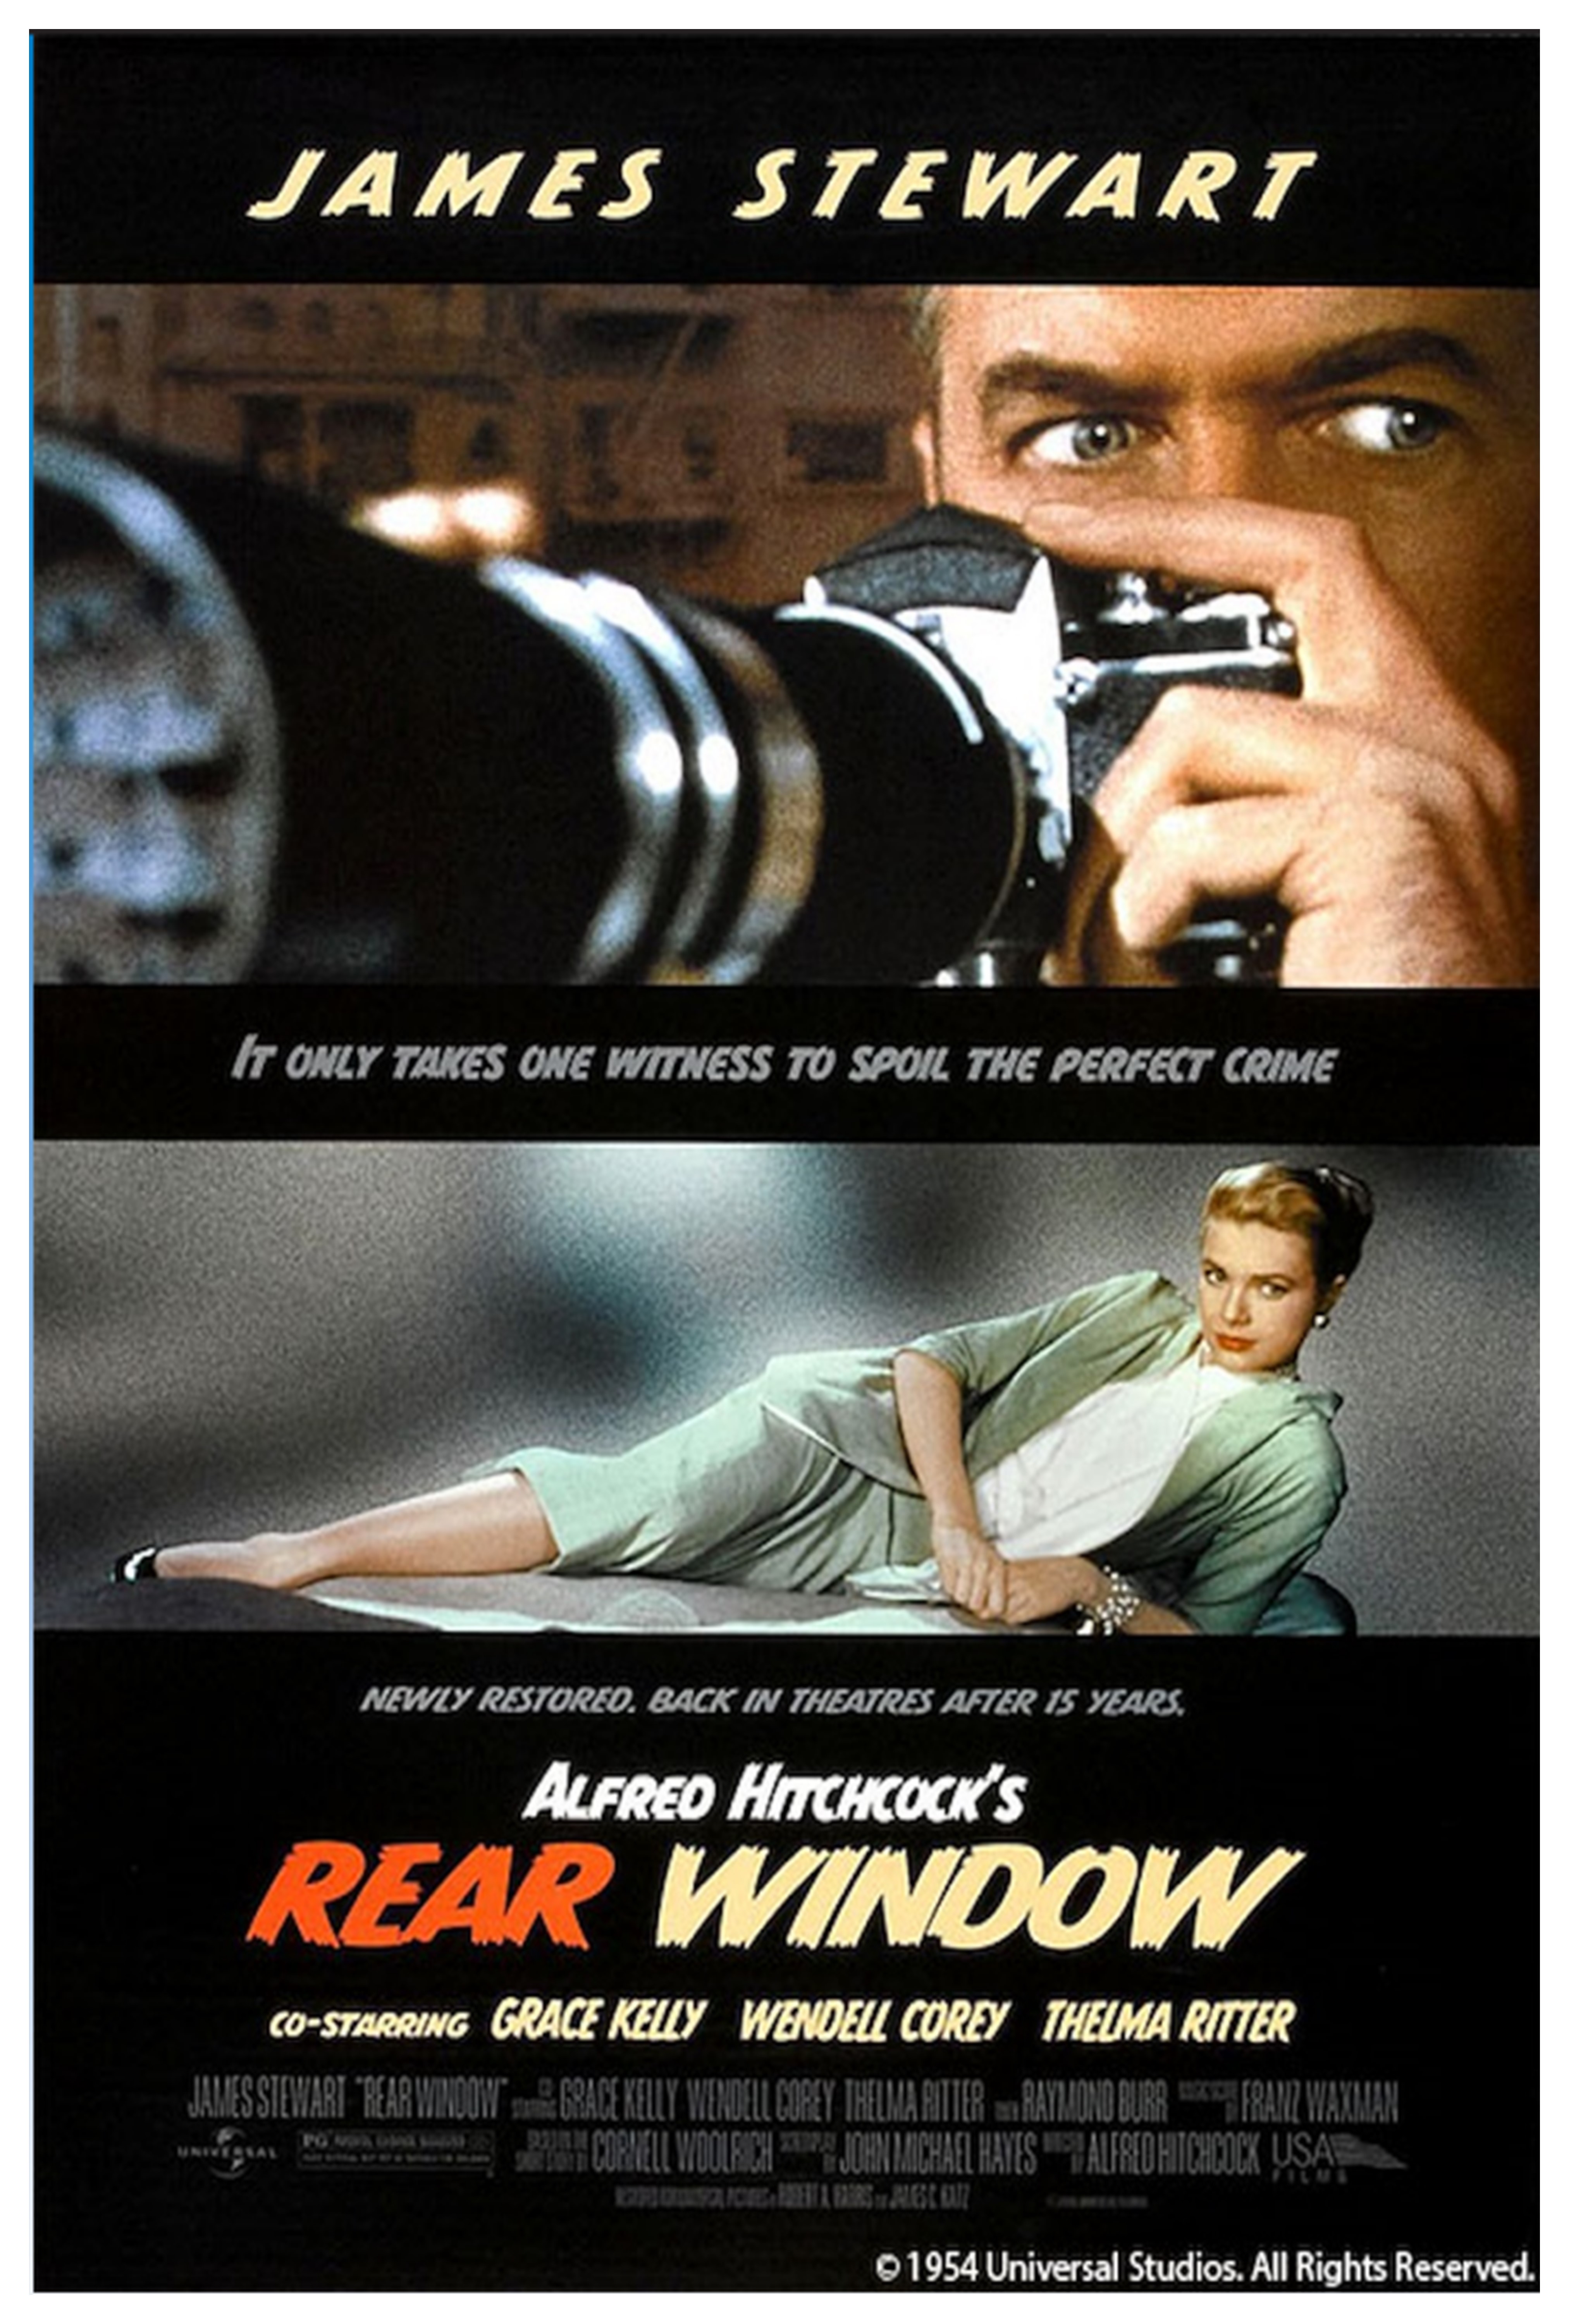 Film poster for Rear Window featuring a man peering over the top of a camera and a grainy image of a woman sprawled across a desk with red and white letters on a black background.